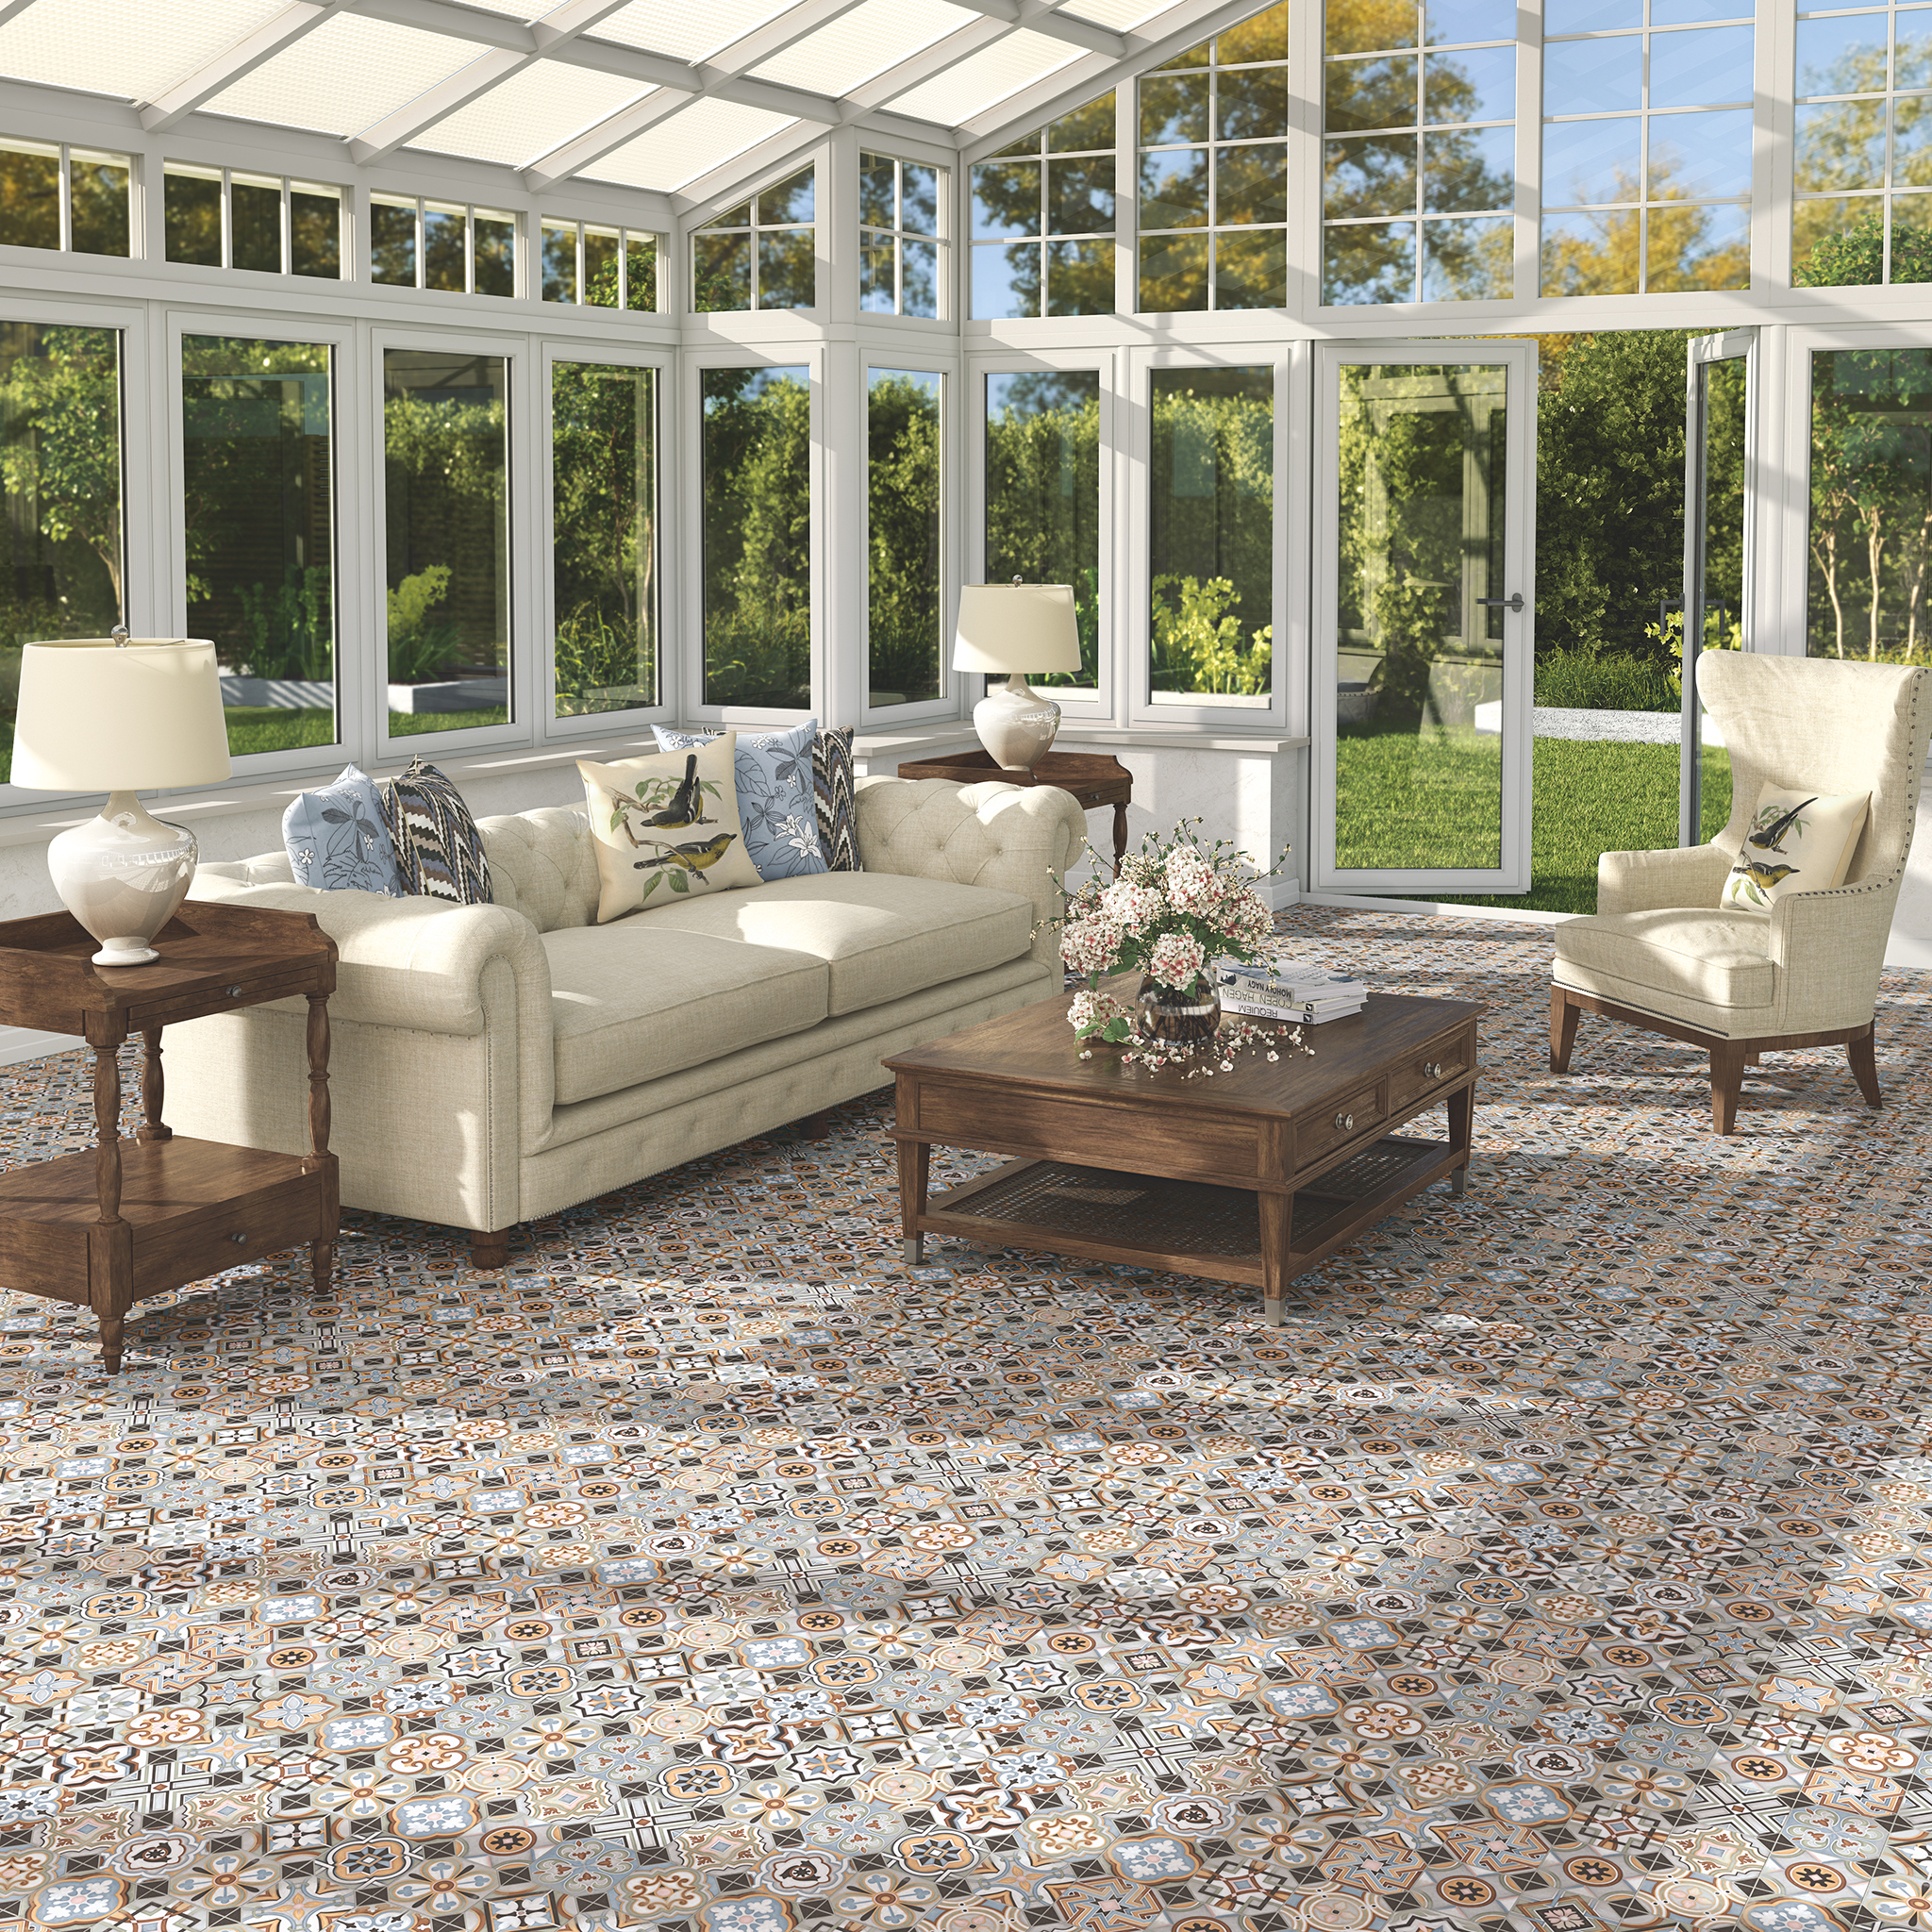 Image of Wickes Central Park Patterned Ceramic Wall & Floor Tile - 316 x 316mm